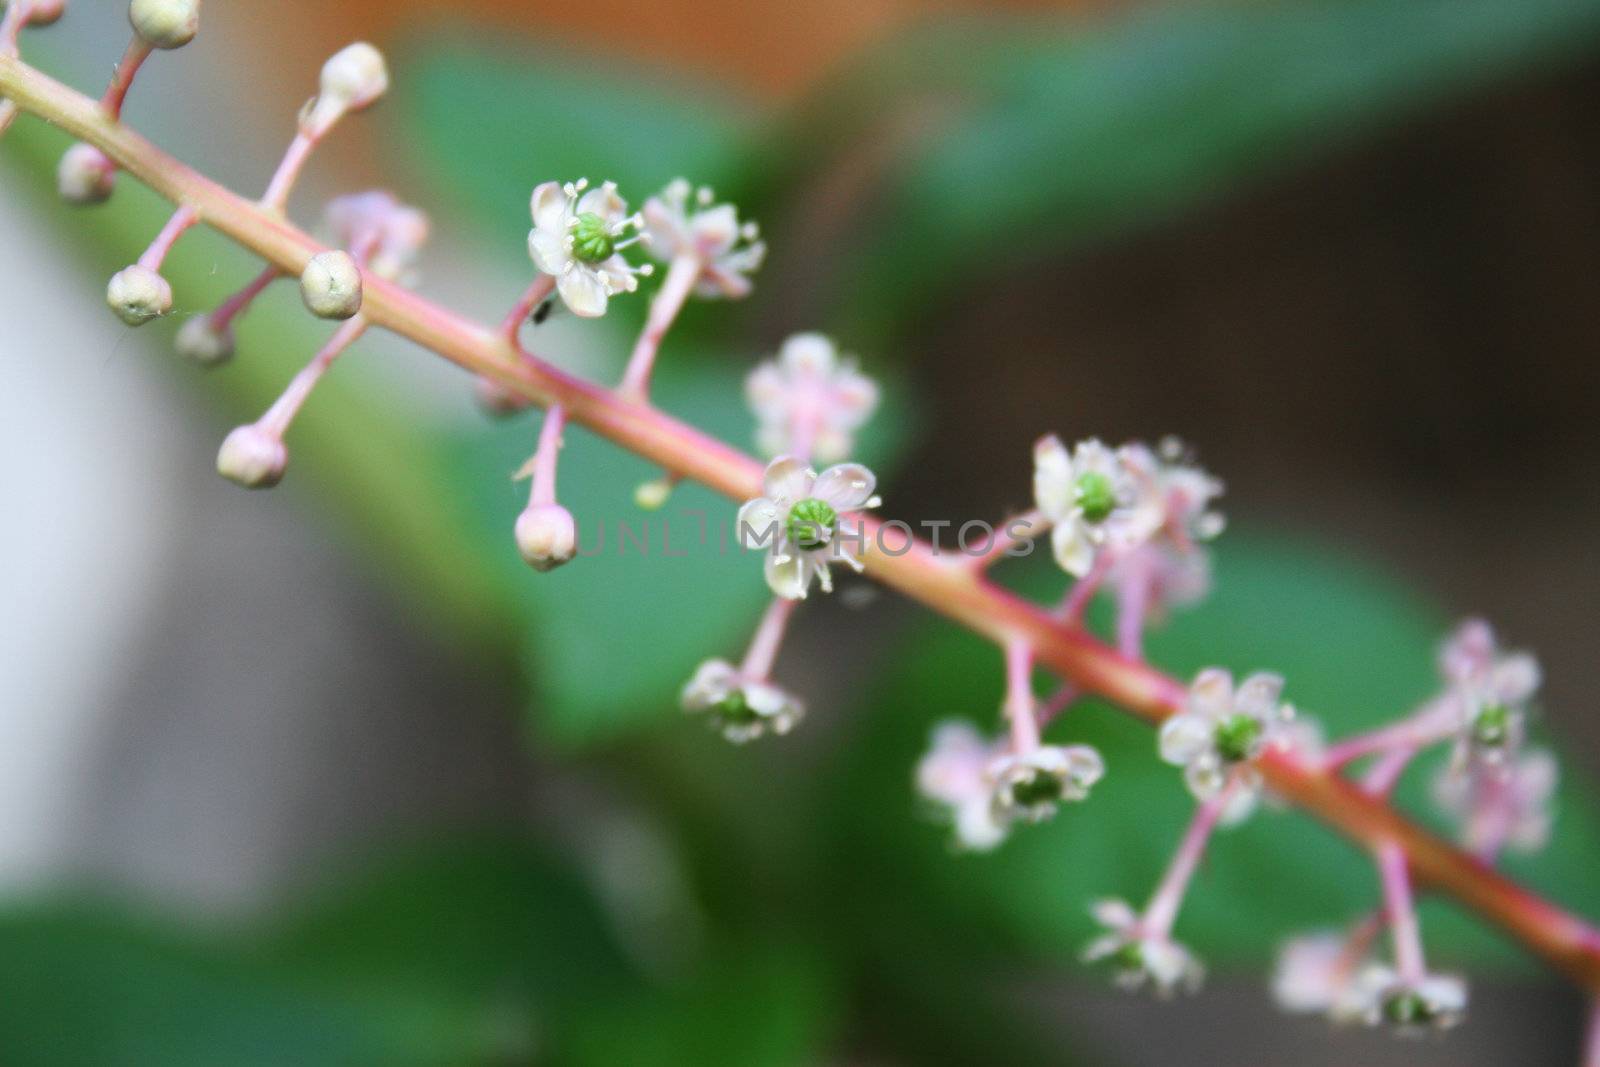 Tiny flowers by timscottrom